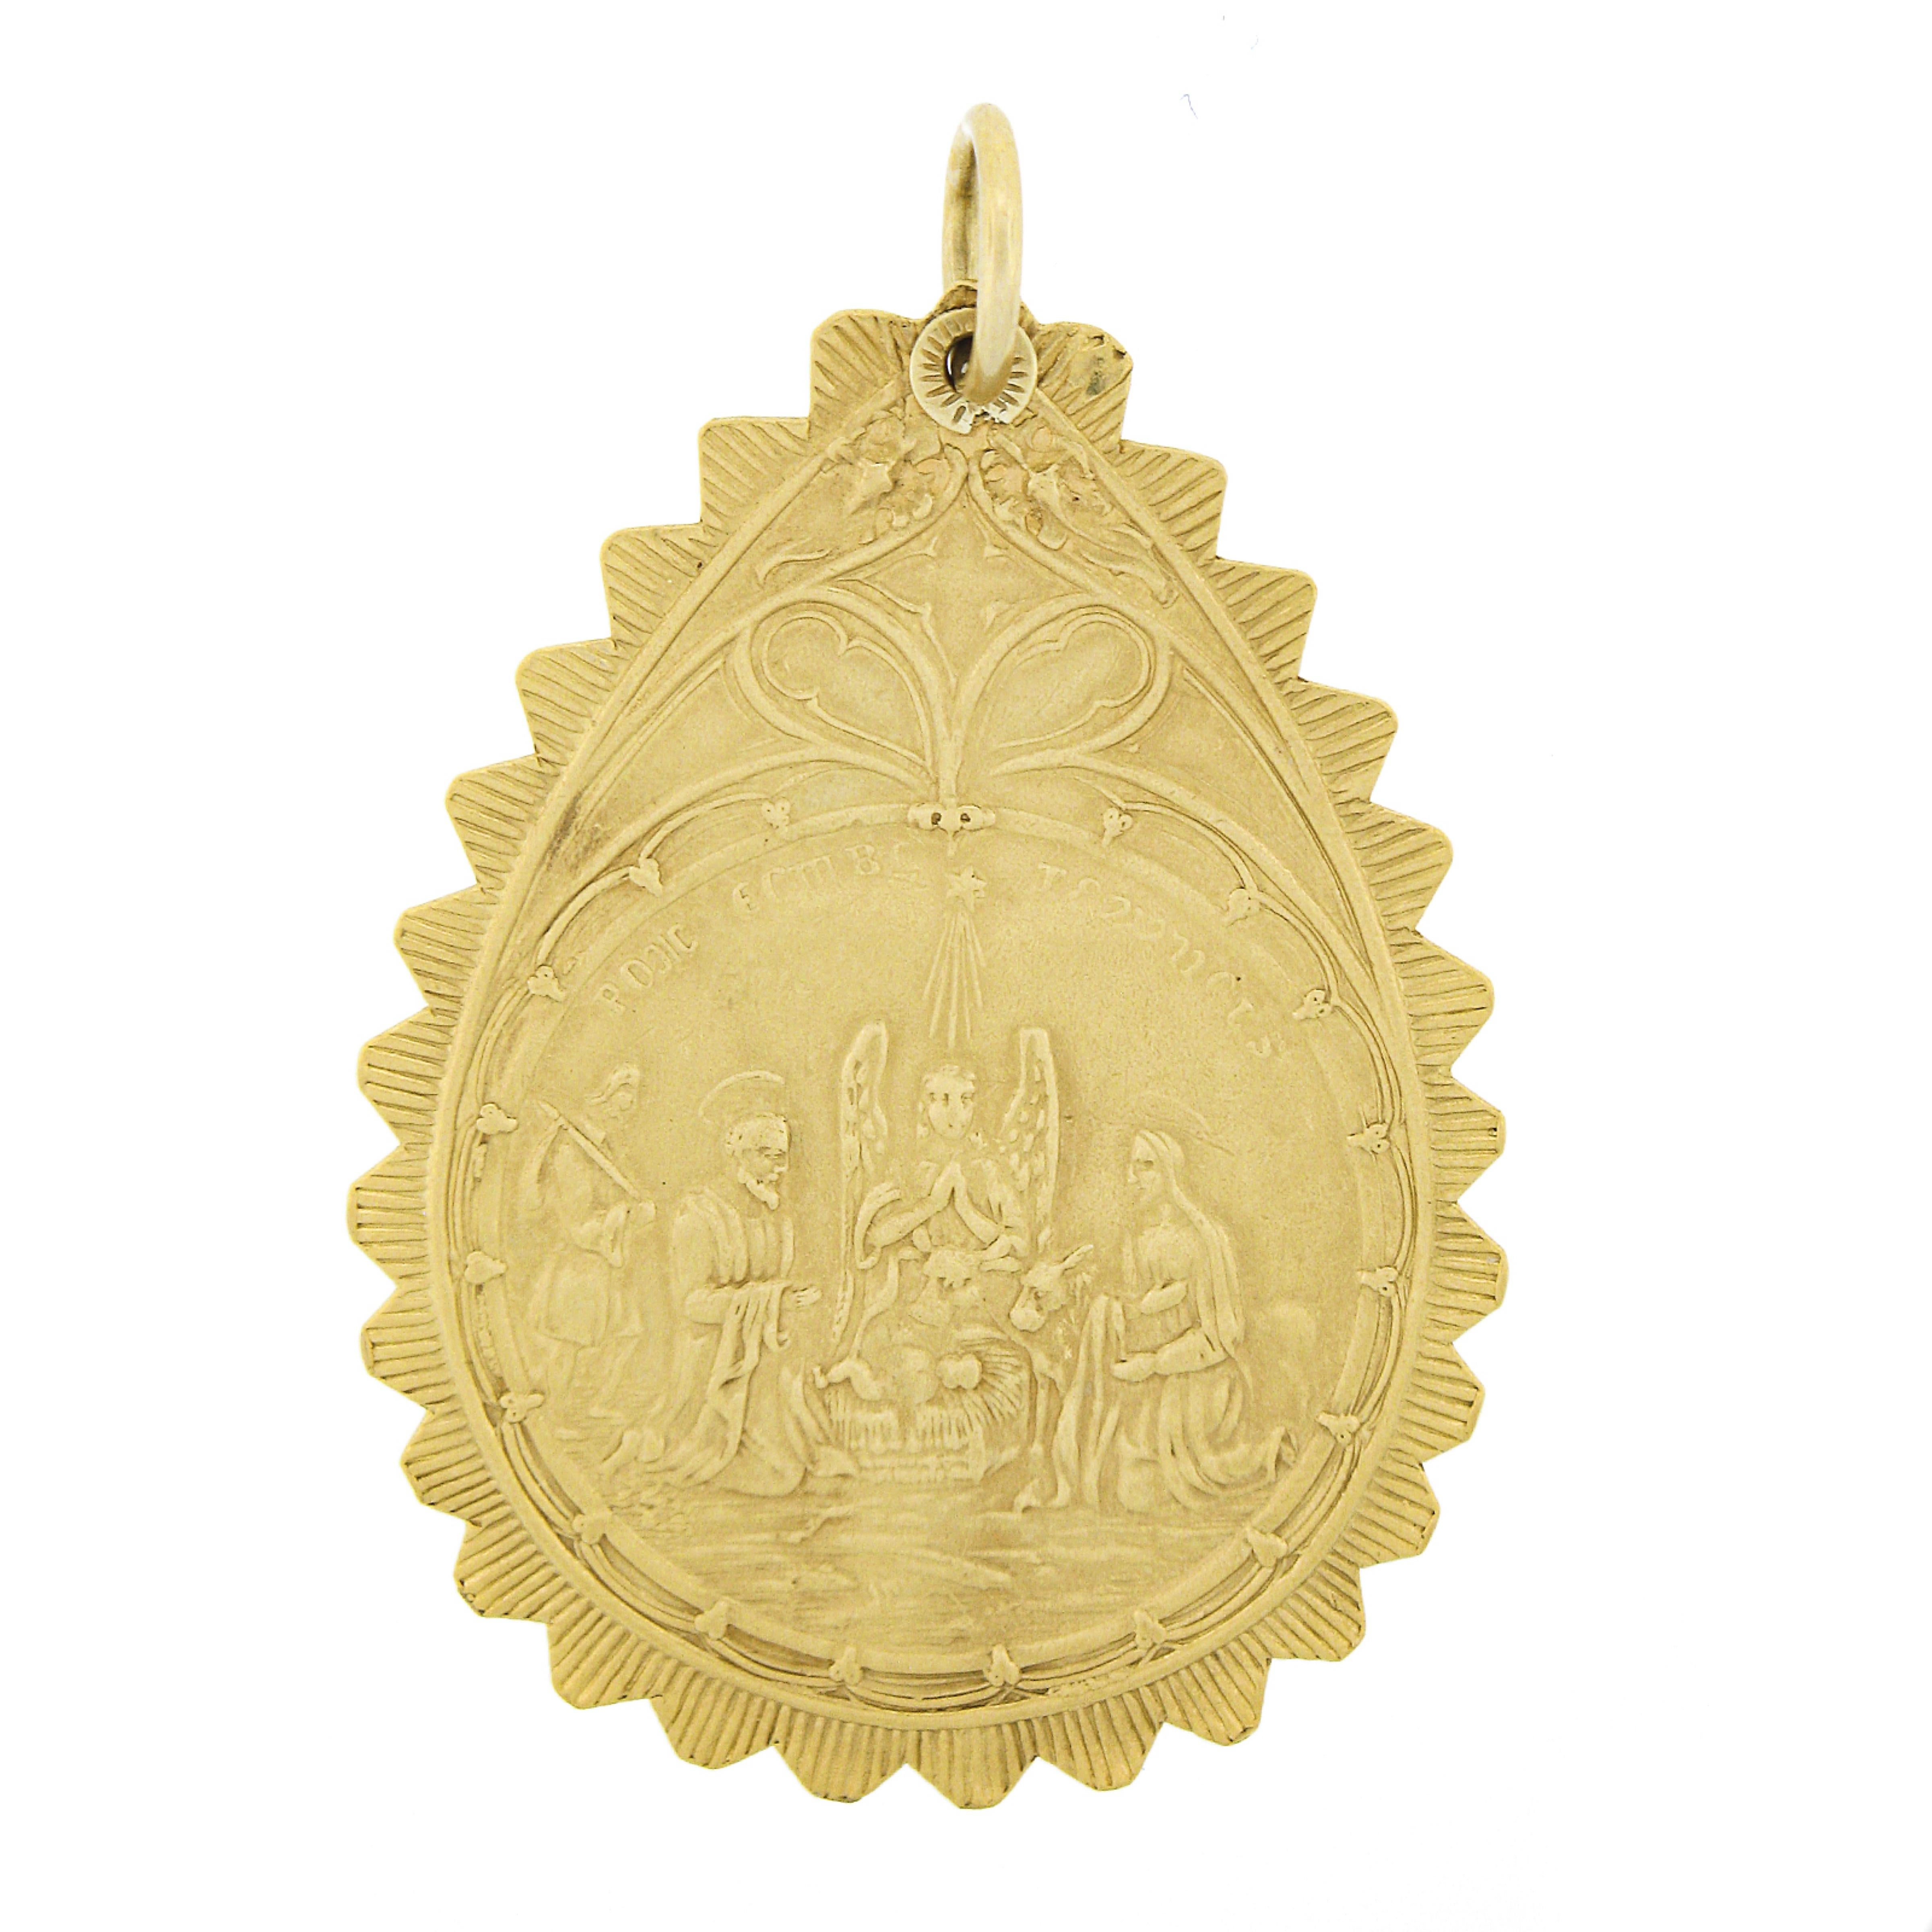 This very well made antique French religious medallion pendant is crafted in solid 18k yellow gold and features a large pear shape design in which displays very highly detailing throughout both its front and back side. This reversible piece displays